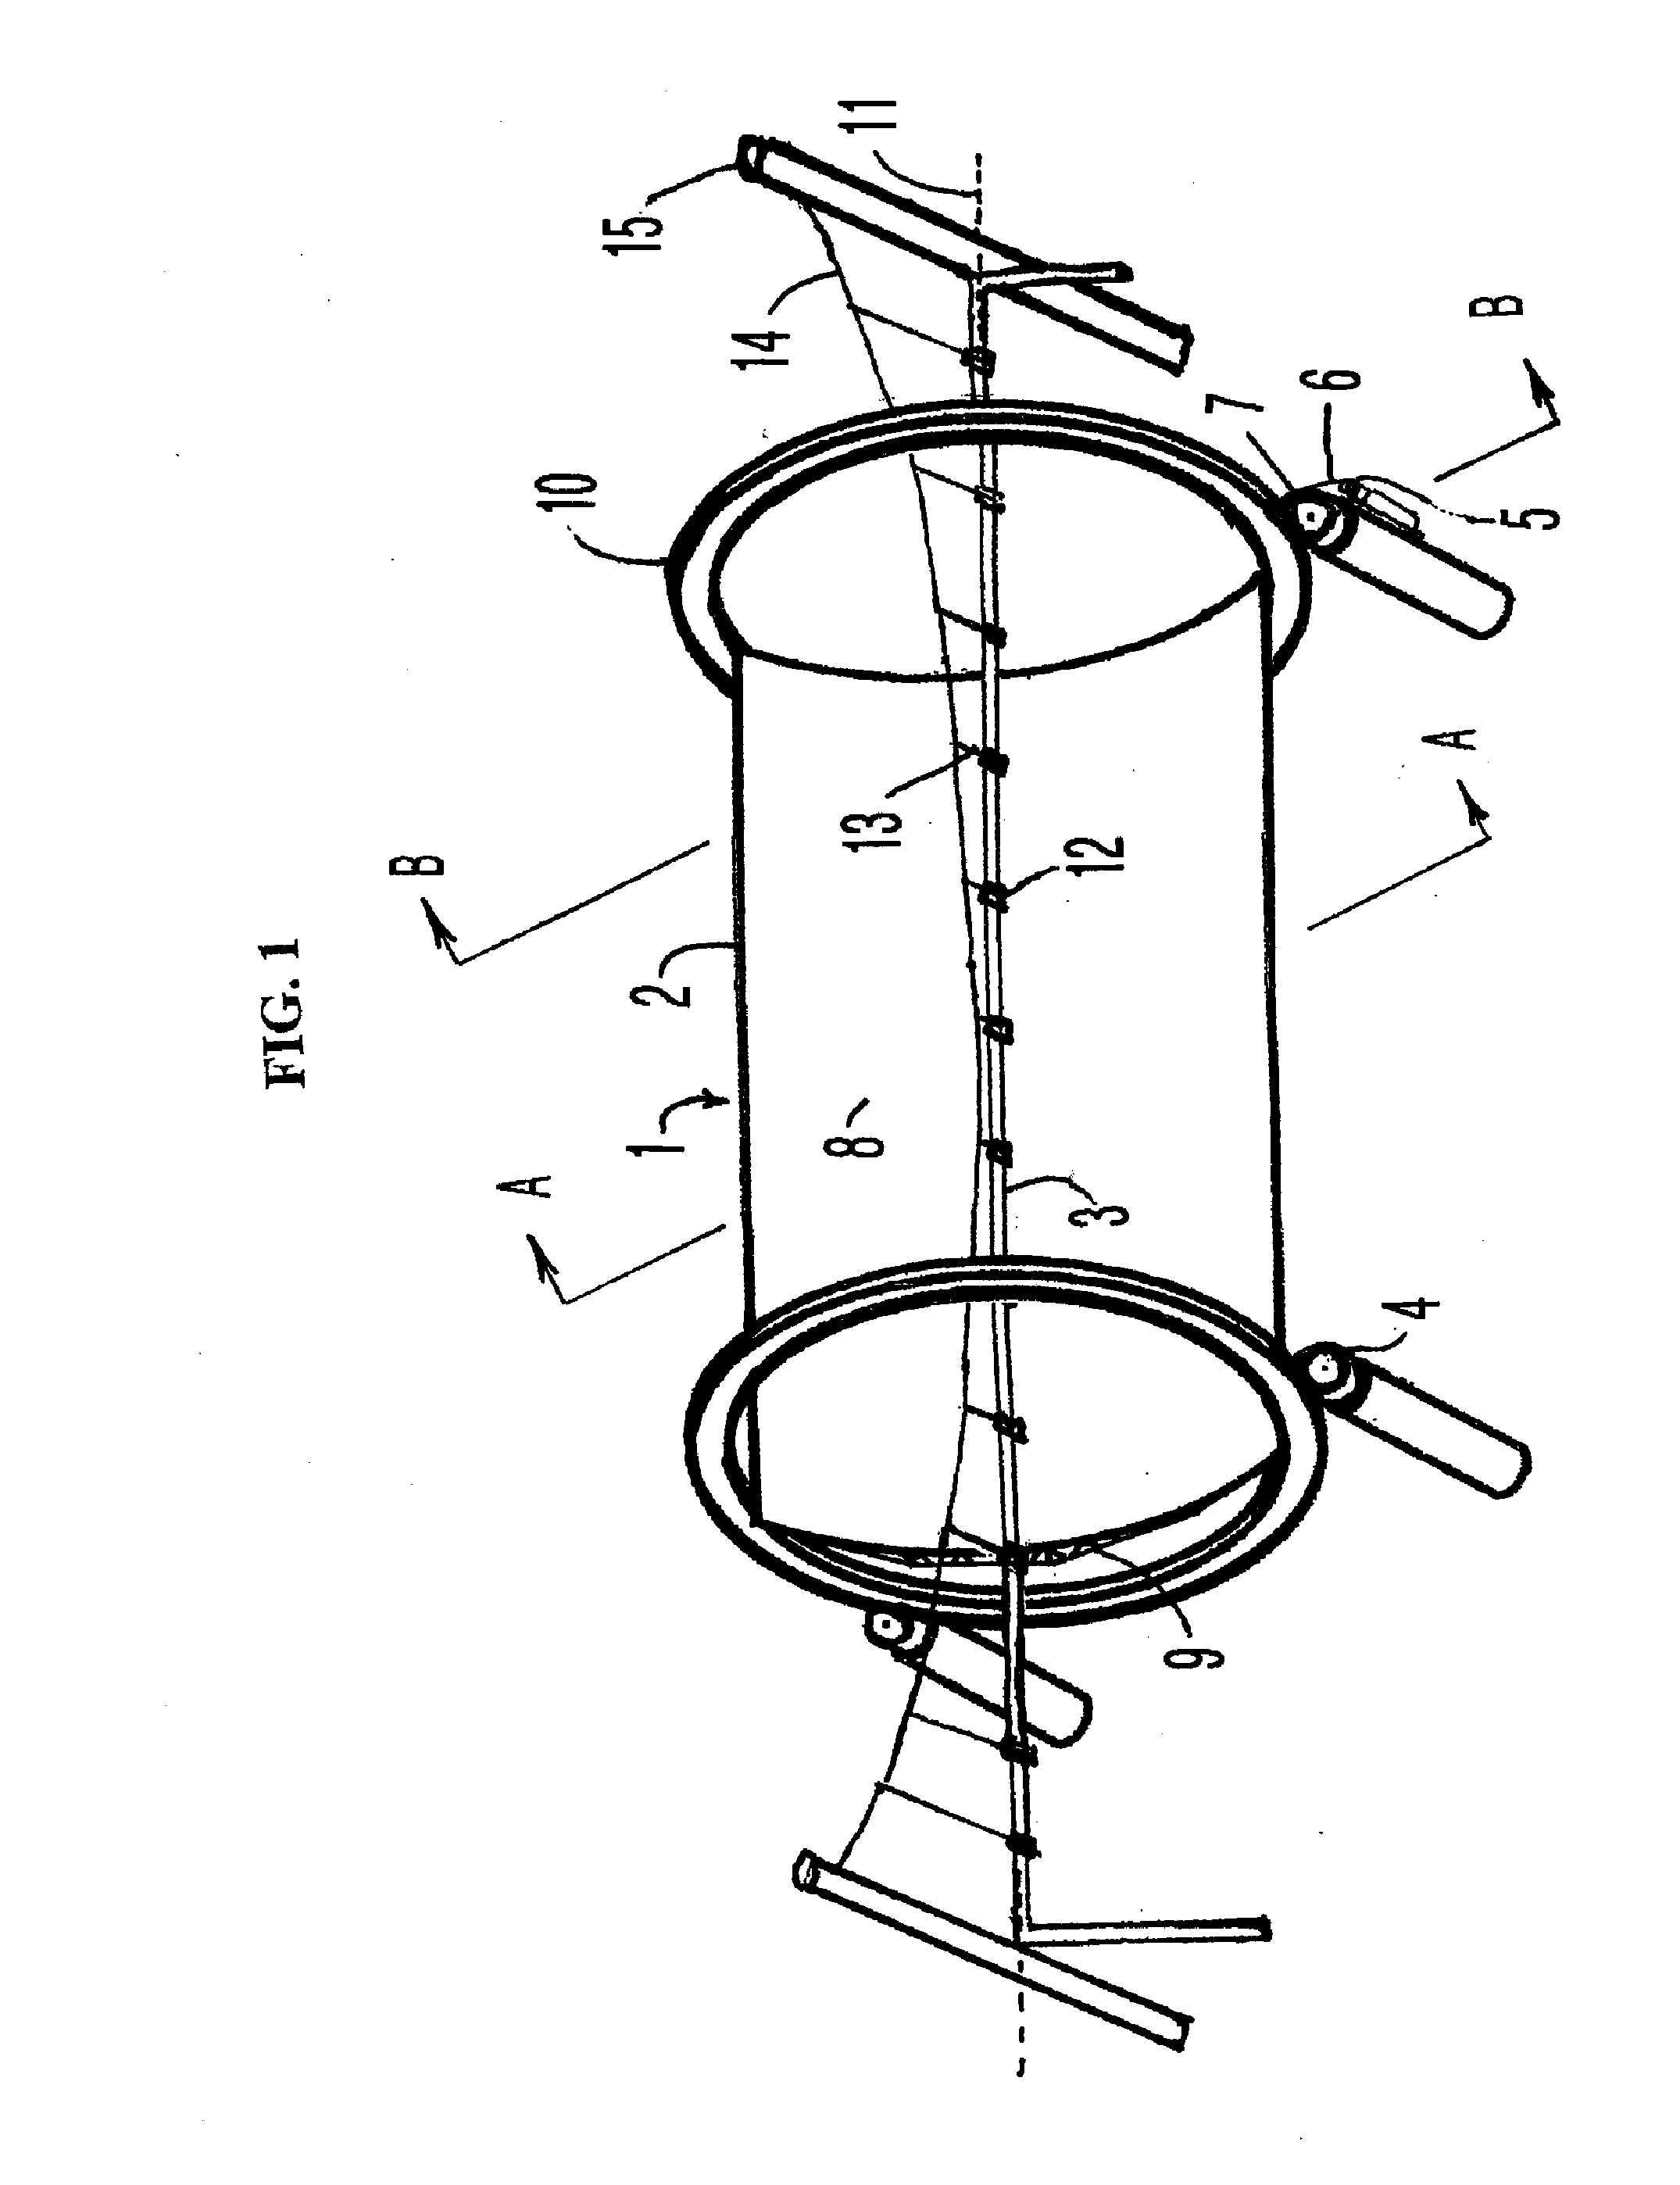 Parabolic Trough Solar Reflector With An Independently Supported Collector Tube